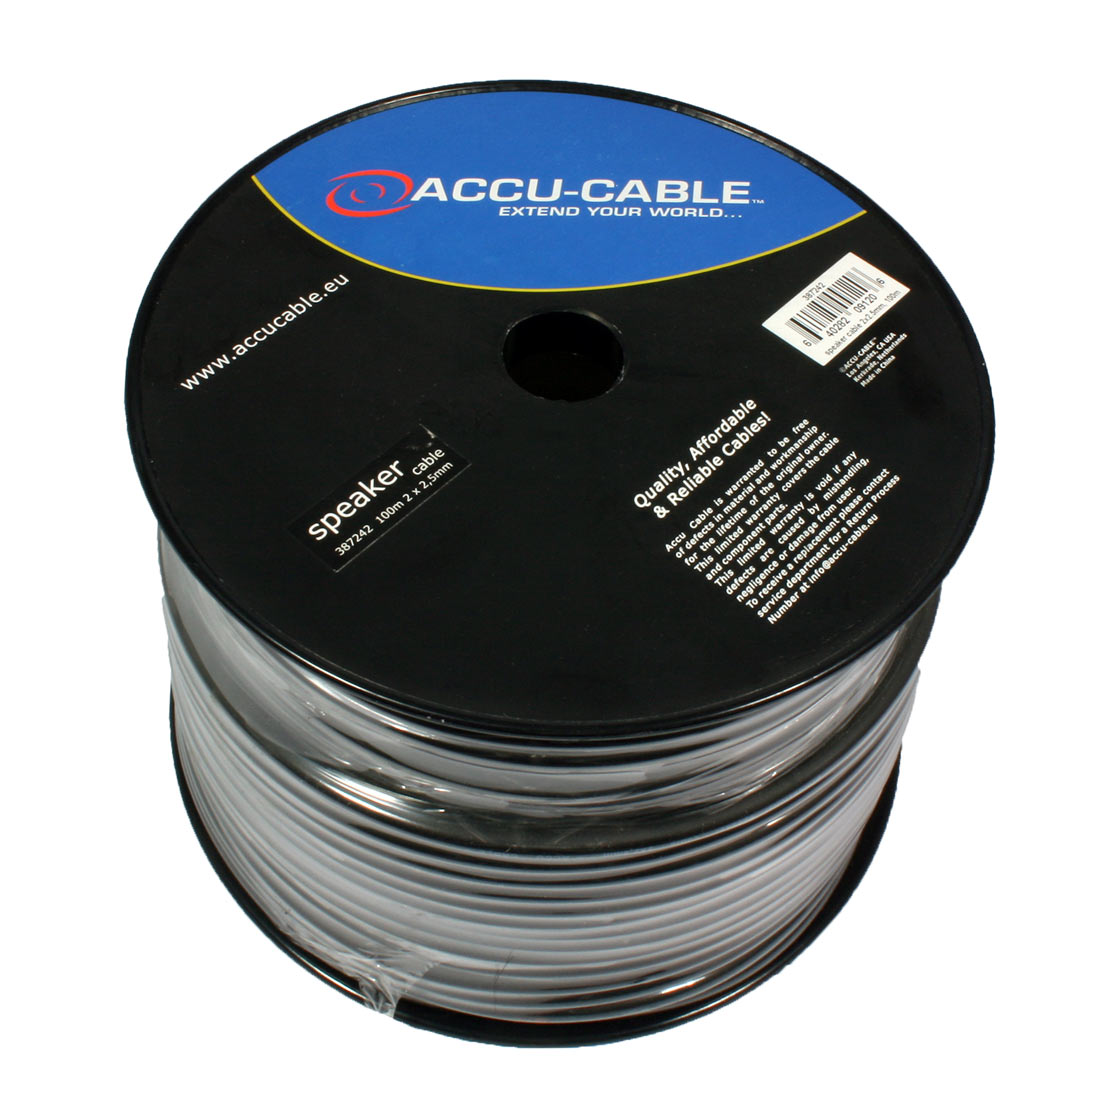 Accu Cable AC-SC2-2,5/100R-B Speaker cable 2x2,5mm